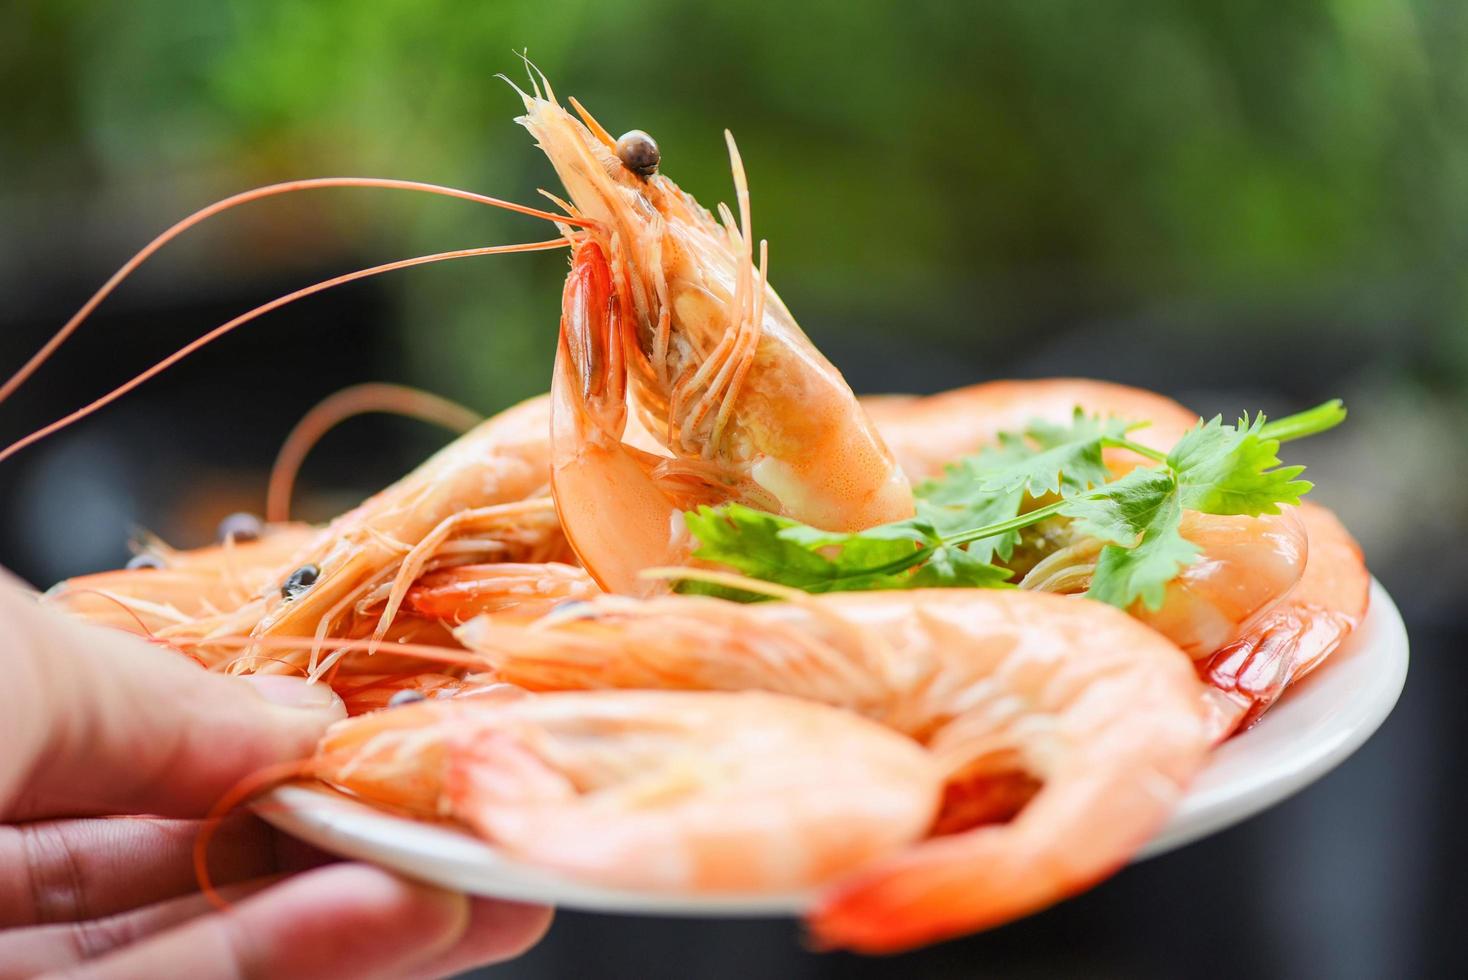 cooking seafood shrimps prawns served with nature background - fresh shrimp on white plate in hand with ingredients herb coriander photo